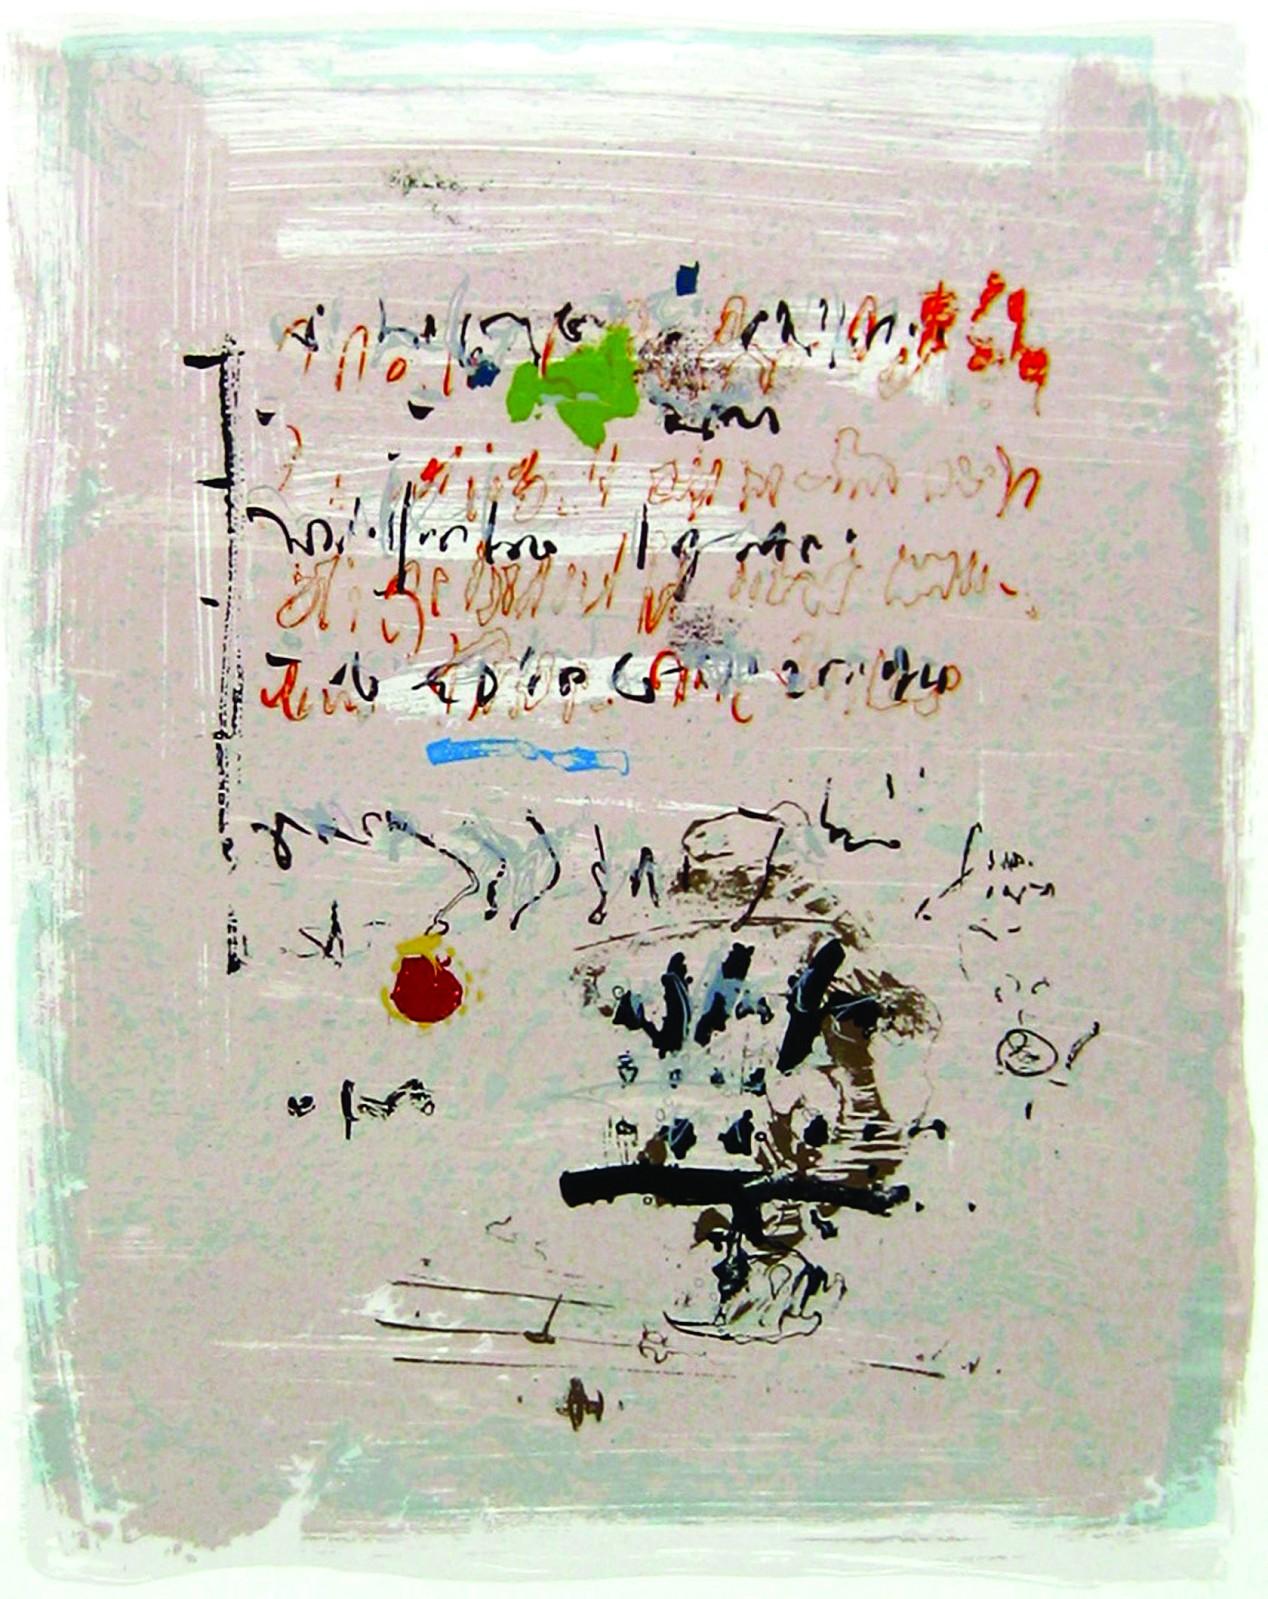 Text - Solid Bass - 10/35 - colorful, calligraphic gestures, serigraph on paper 